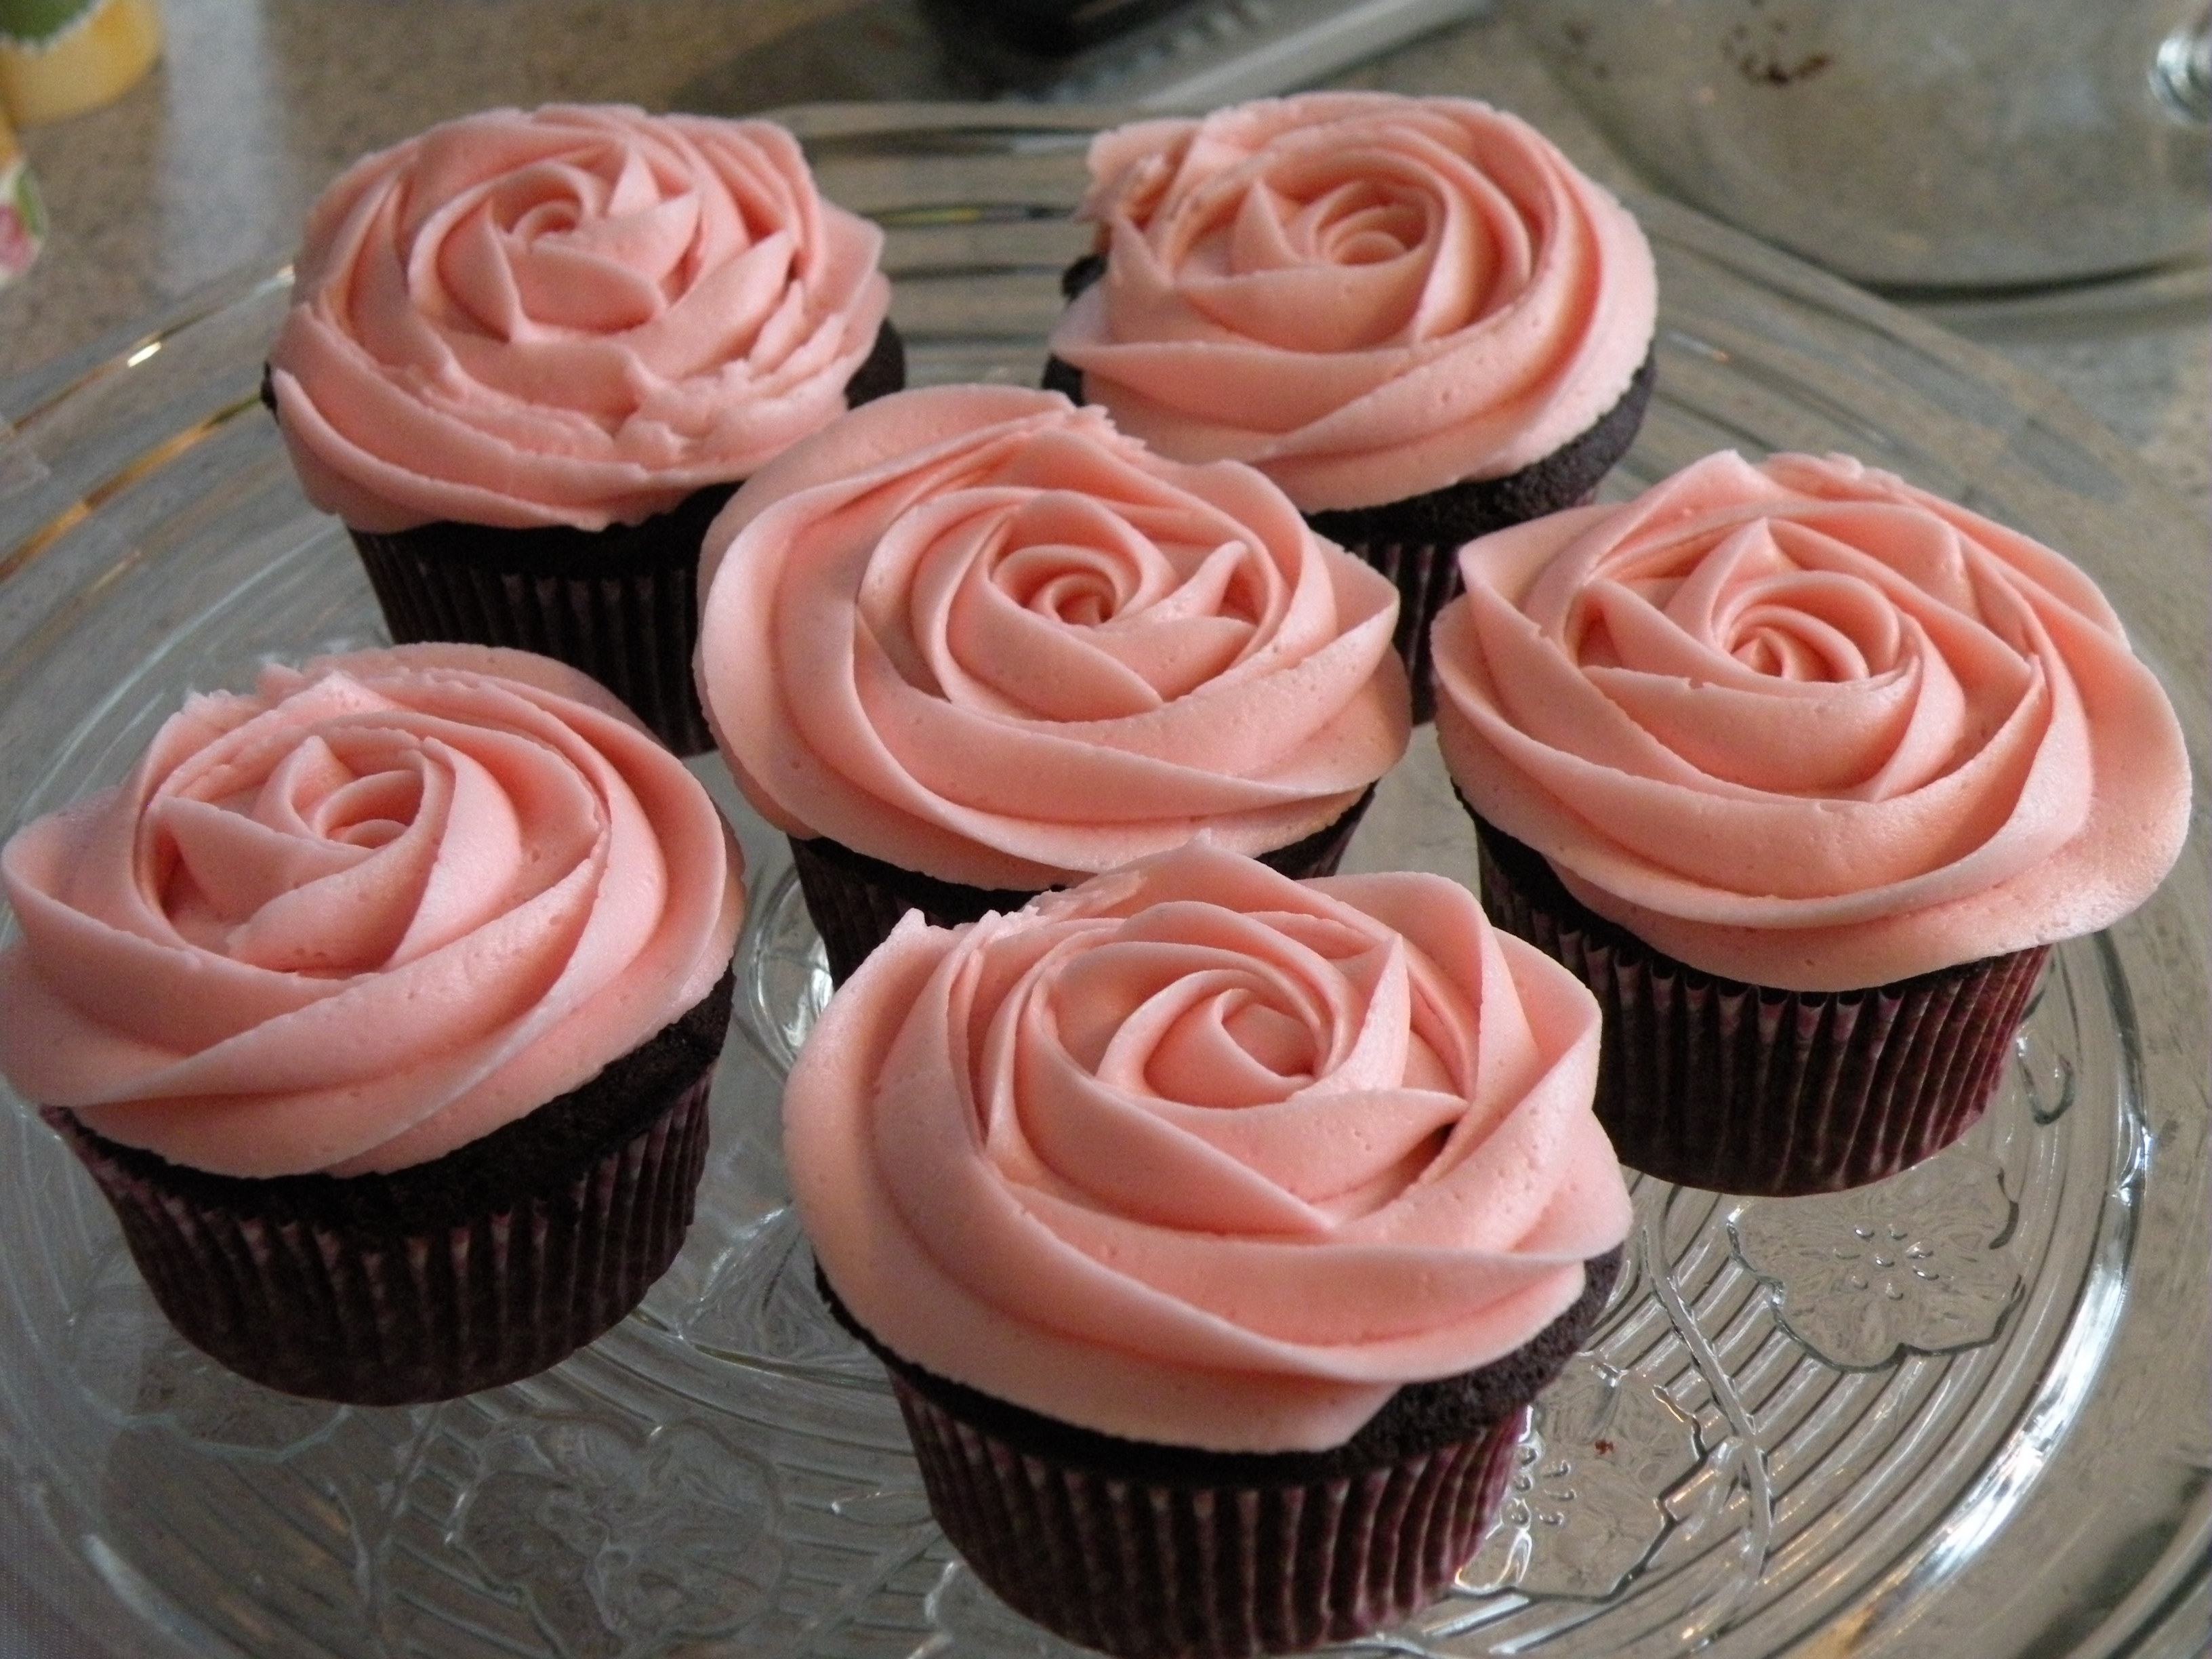 Rose Cupcakes with Icing